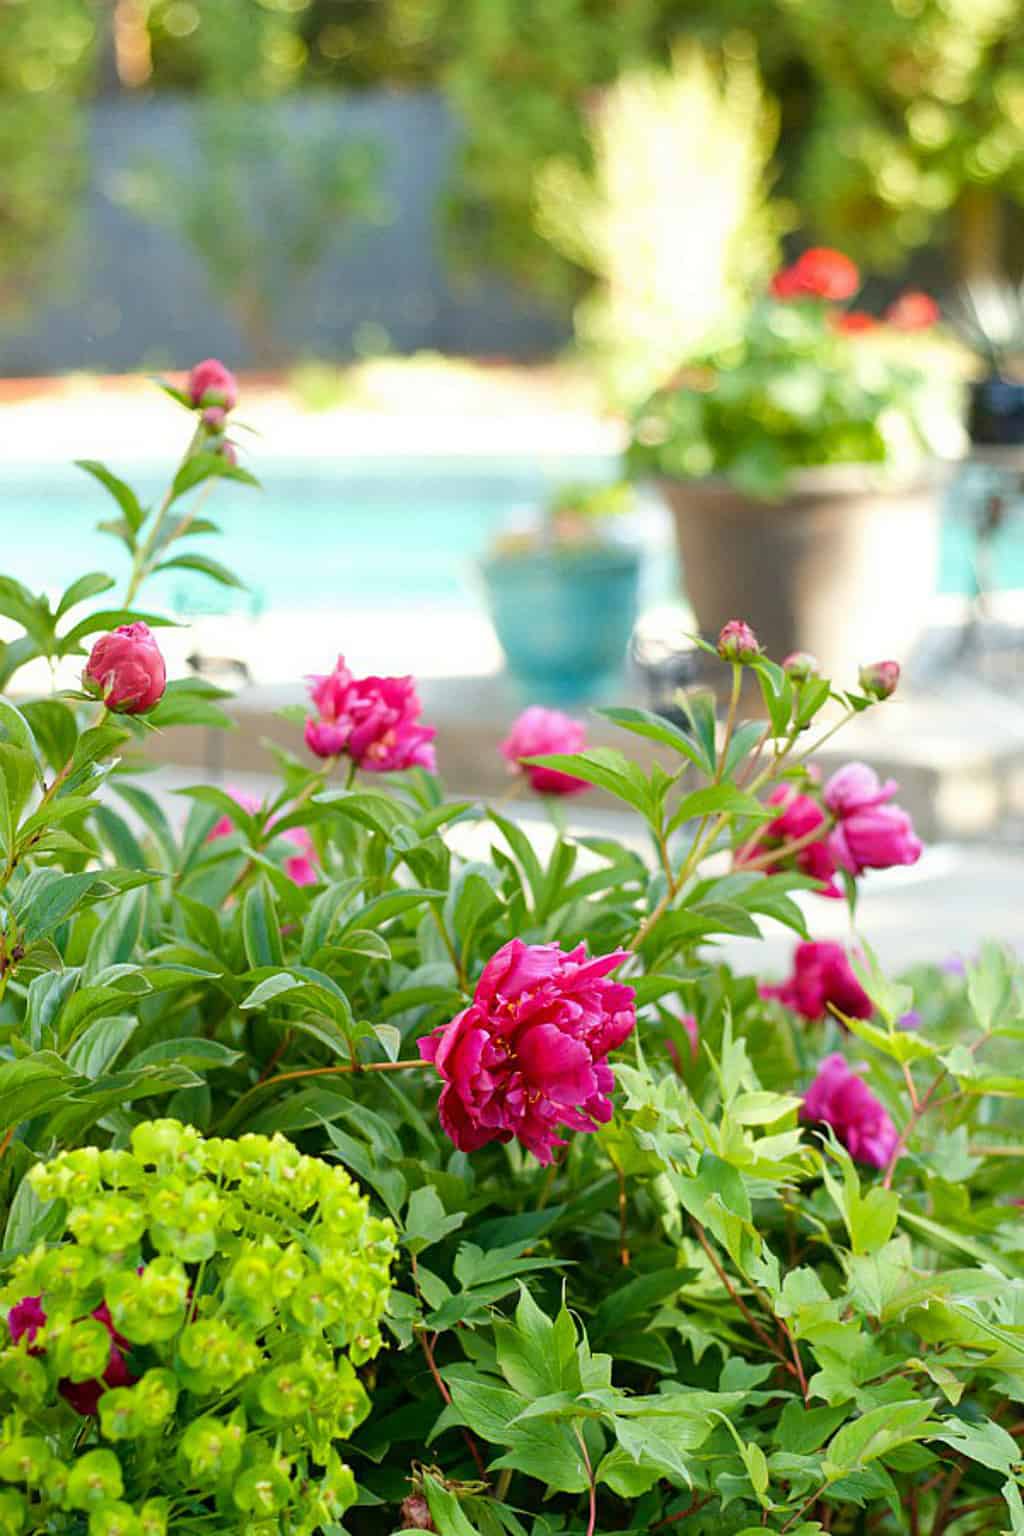 How to Keep Peonies Fresh Longer With 7 Simple Tricks